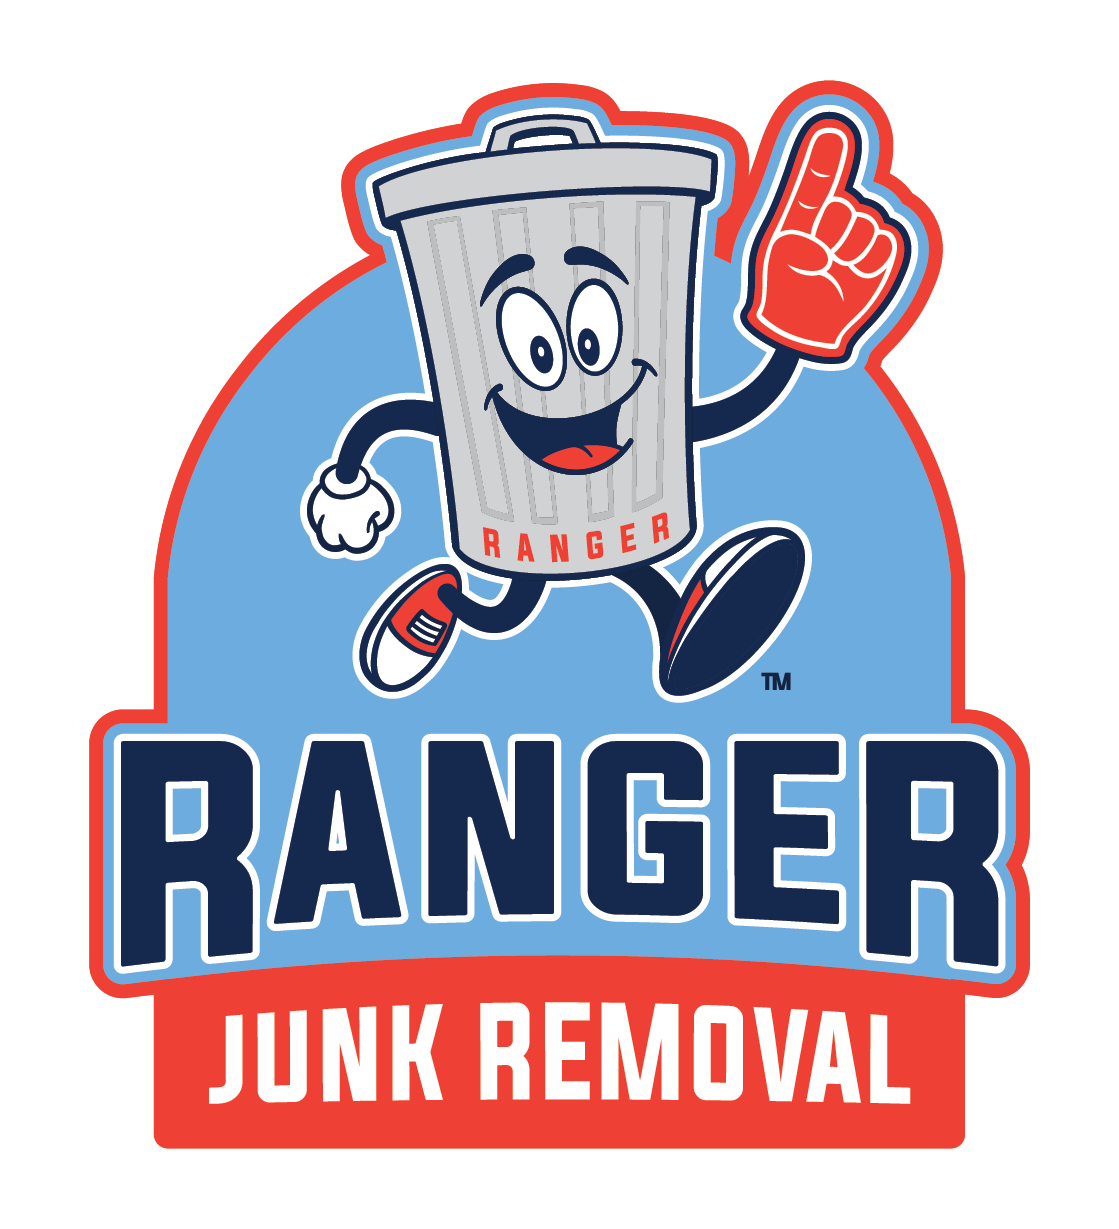 Junk Removal Services in North Texas